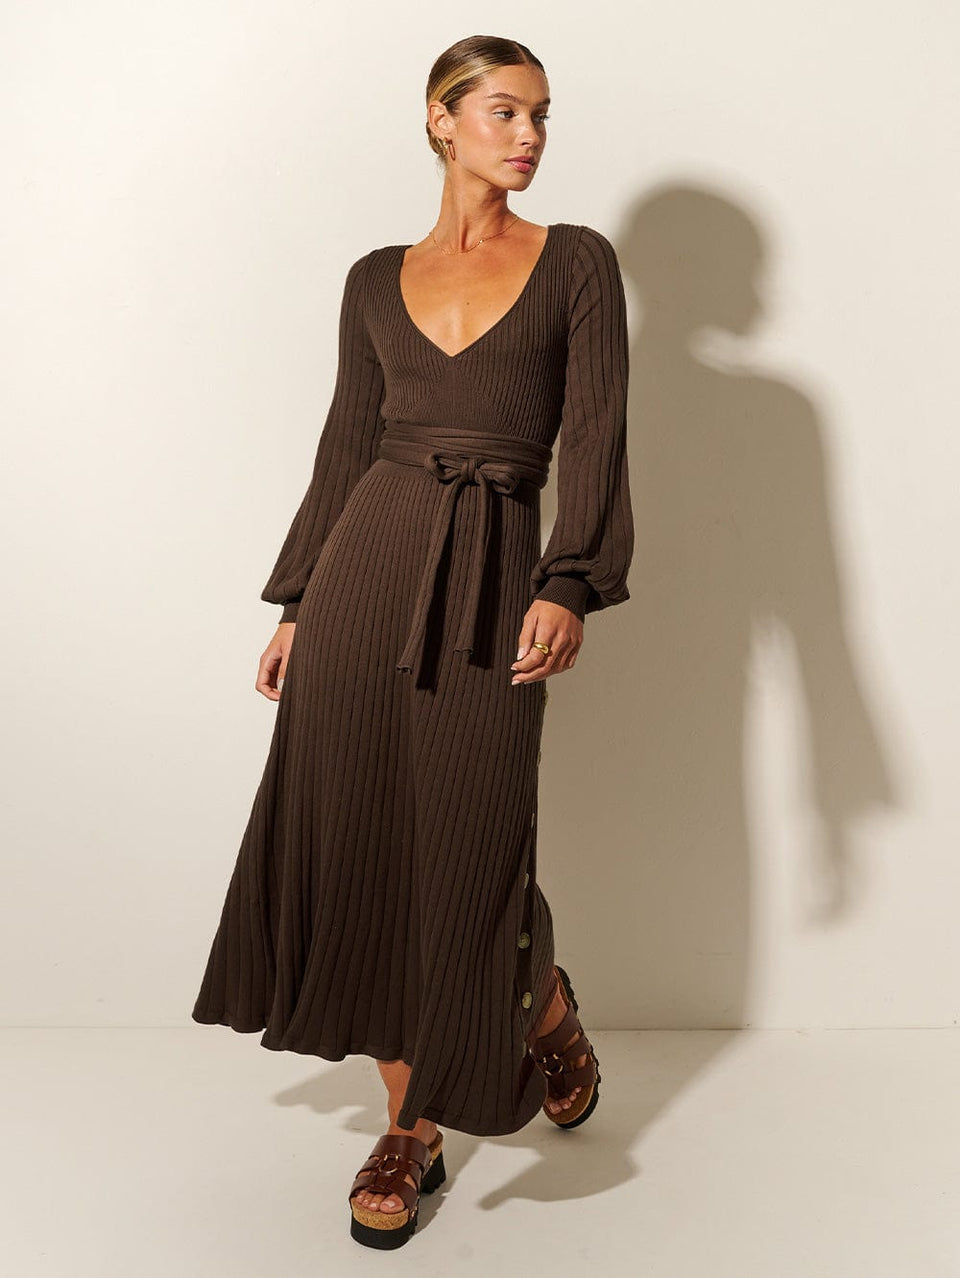 Studio model wears the KIVARI Yolanda Long Sleeve Knit Dress - Chocolate: A rich brown reversible dress made from rib knit stitching with soft underbust seams, a tie-back feature with cut-out detail, full-length blouson sleeves and an A-line skirt.